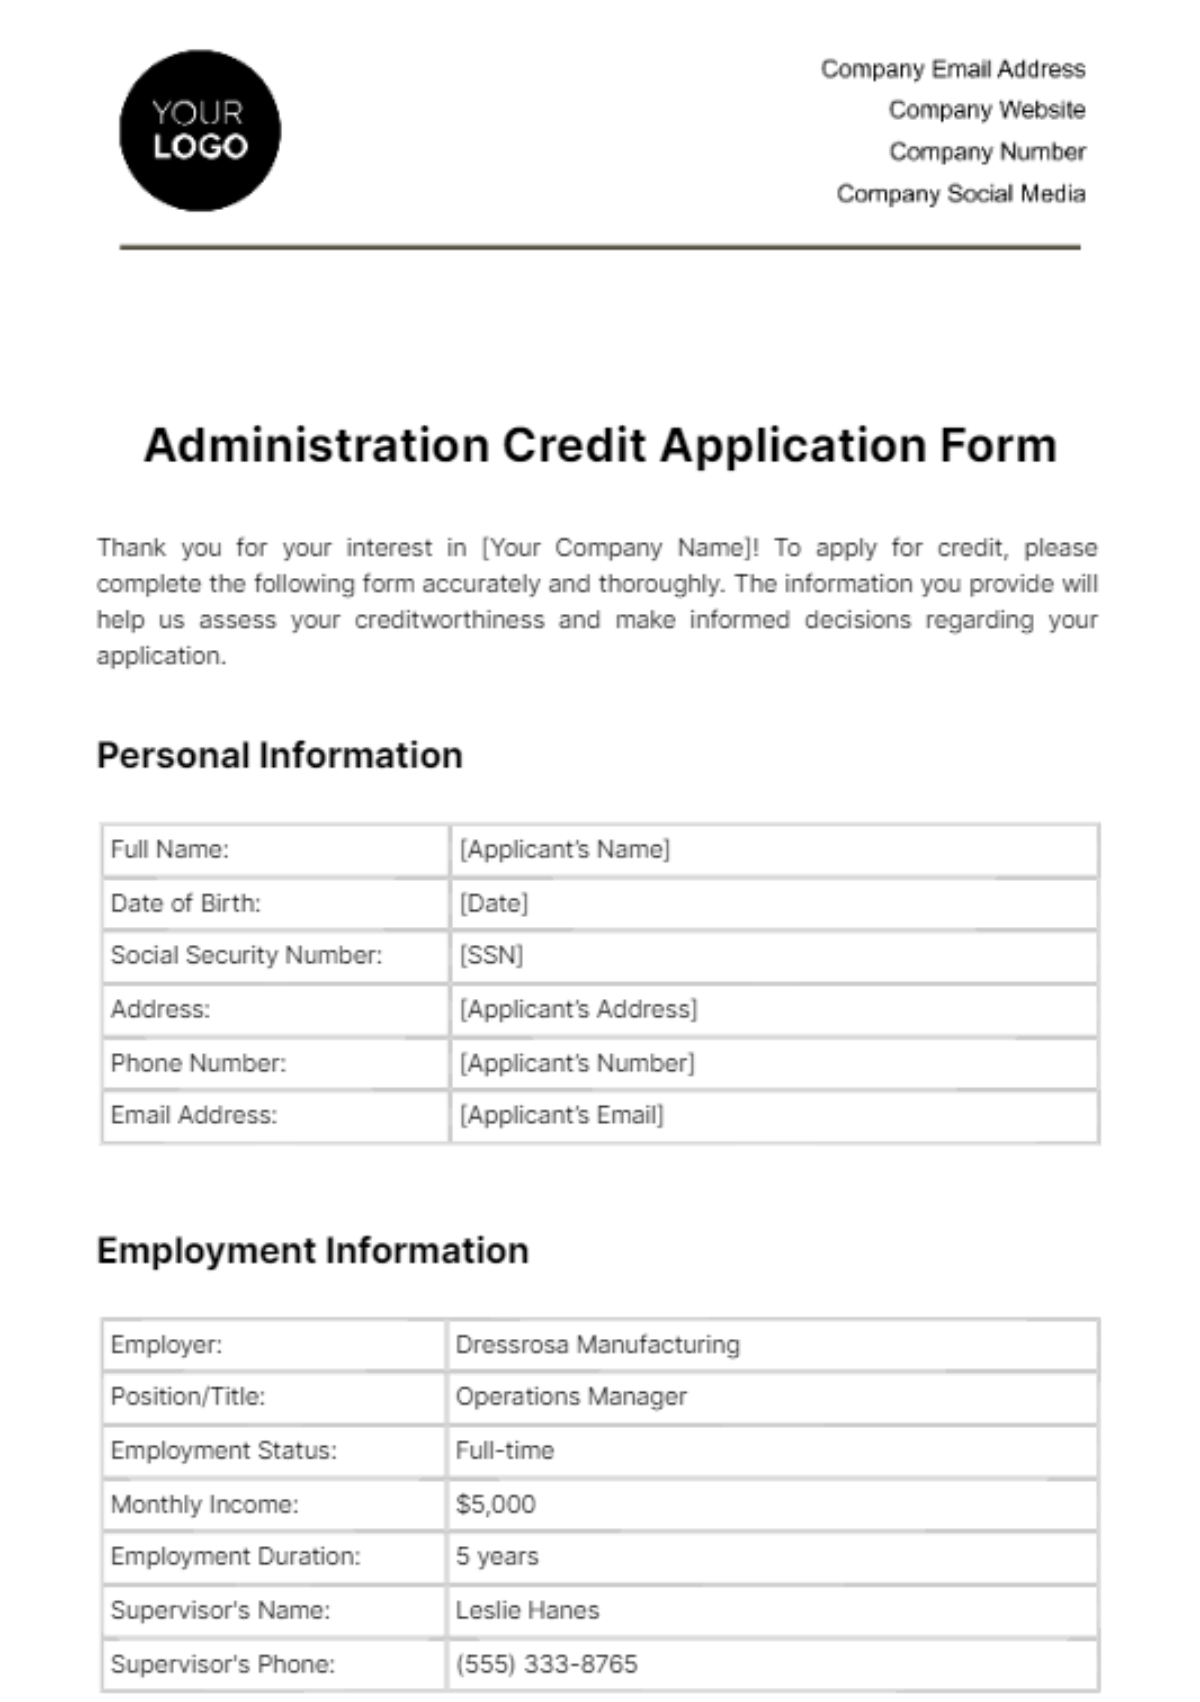 Administration Credit Application Form Template